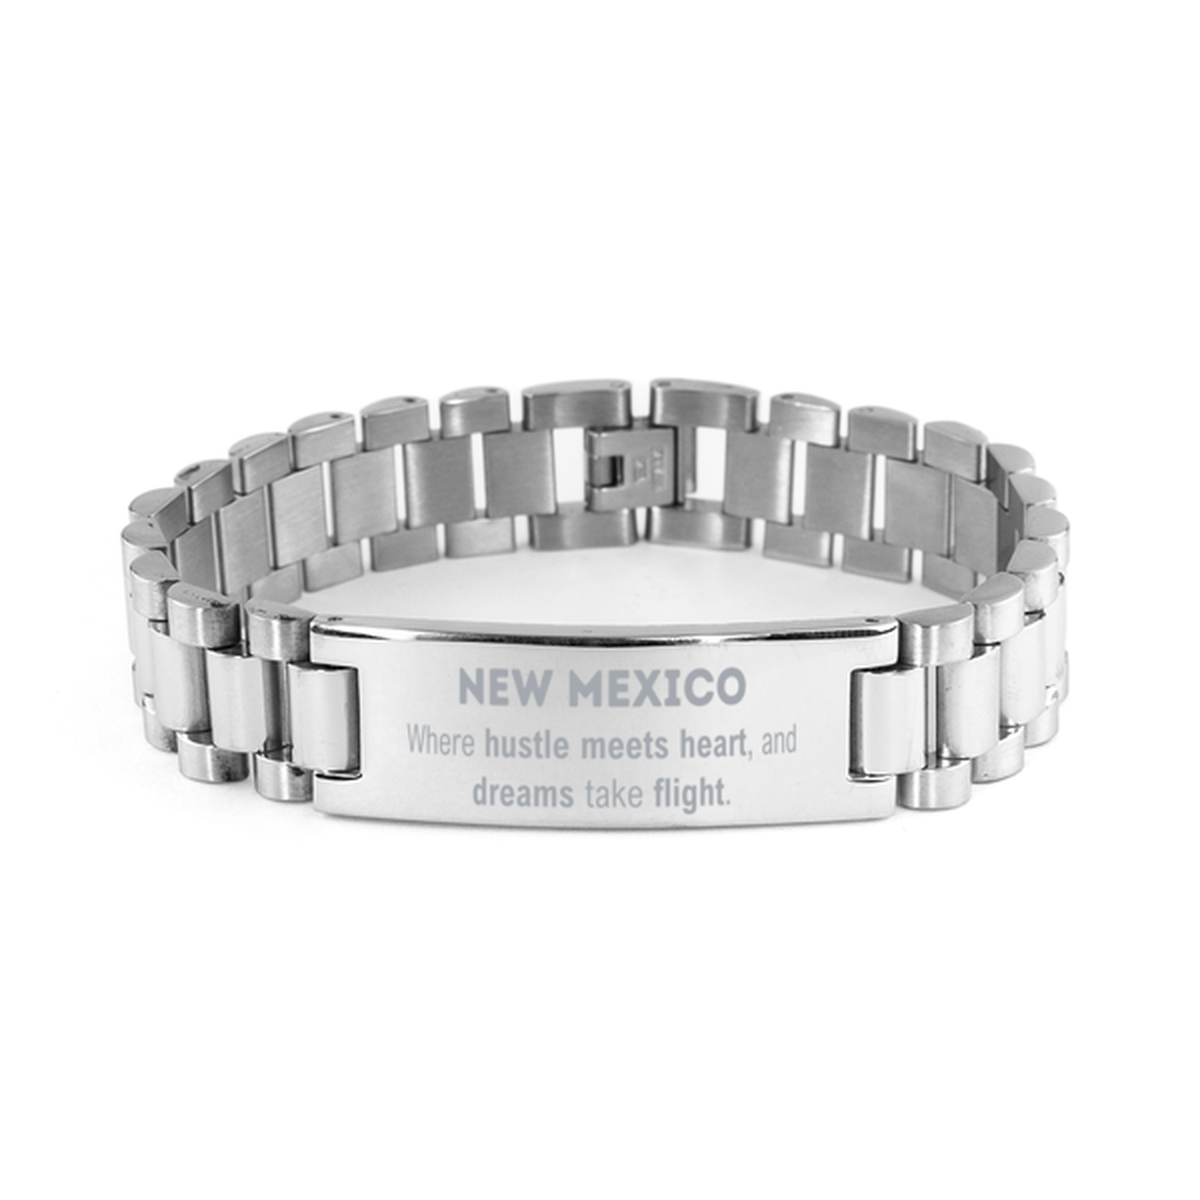 New Mexico: Where hustle meets heart, and dreams take flight, New Mexico Gifts, Proud New Mexico Christmas Birthday New Mexico Ladder Stainless Steel Bracelet, New Mexico State People, Men, Women, Friends